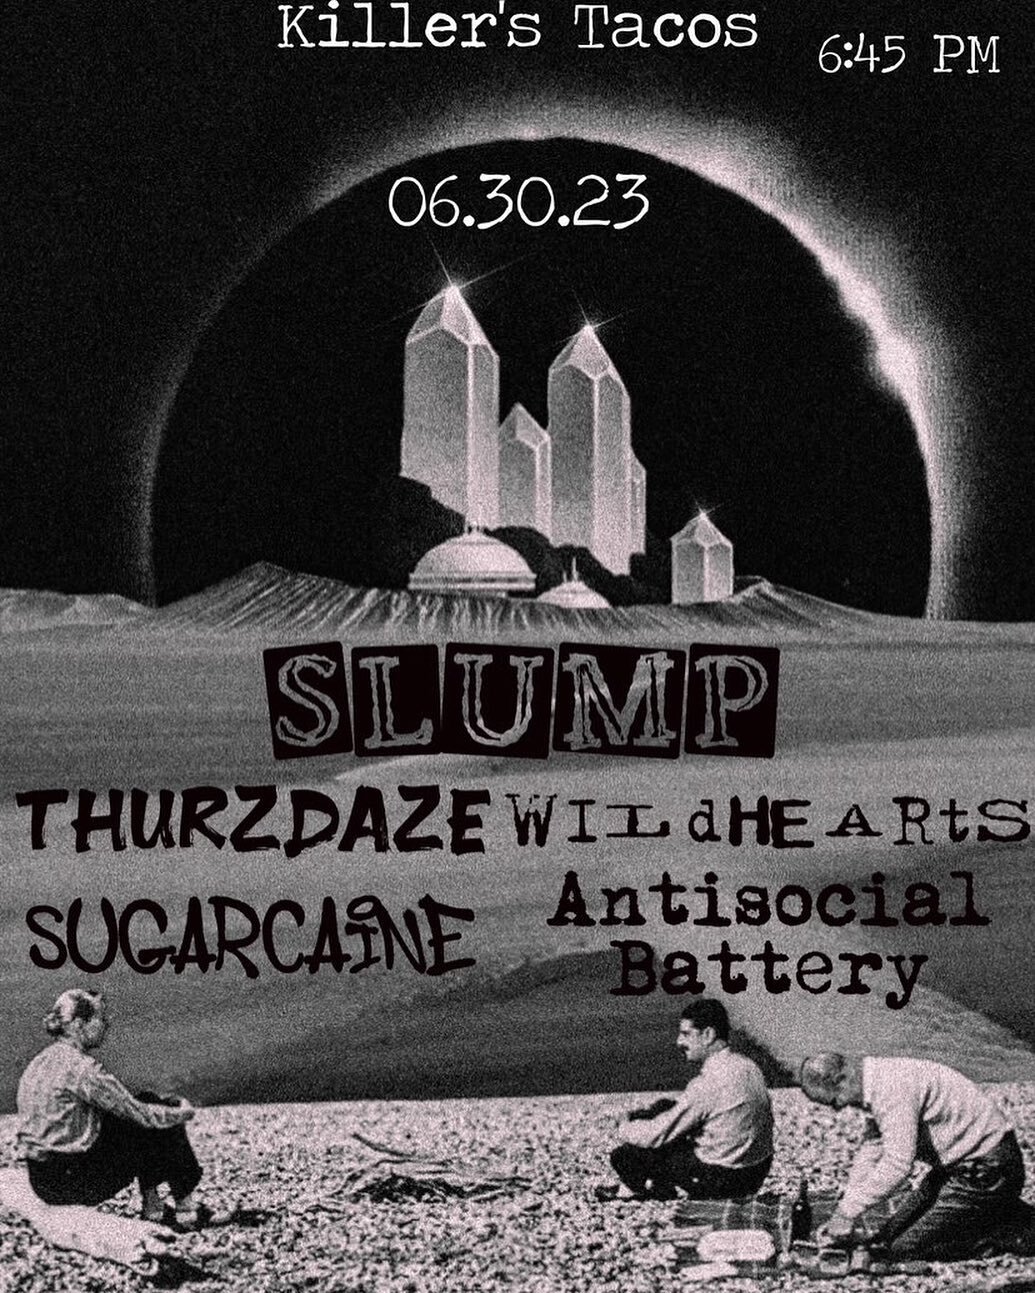 KILLERS TACOS JUNE 30TH 

THAT IS 424 BRYAN ST, DENTON TX ON JUNE 30TH 

ITS A HEAVY LINEUP FOLLOWED BY THE RETURN OF @slump.theband 

COME SUPPORT LOCAL MUSIC, LOCAL TACOS, AND FOLLOW AND SUPPORT THESE BANDS!

@sugarcaineband 
@wildhearts.dtx 
@thur